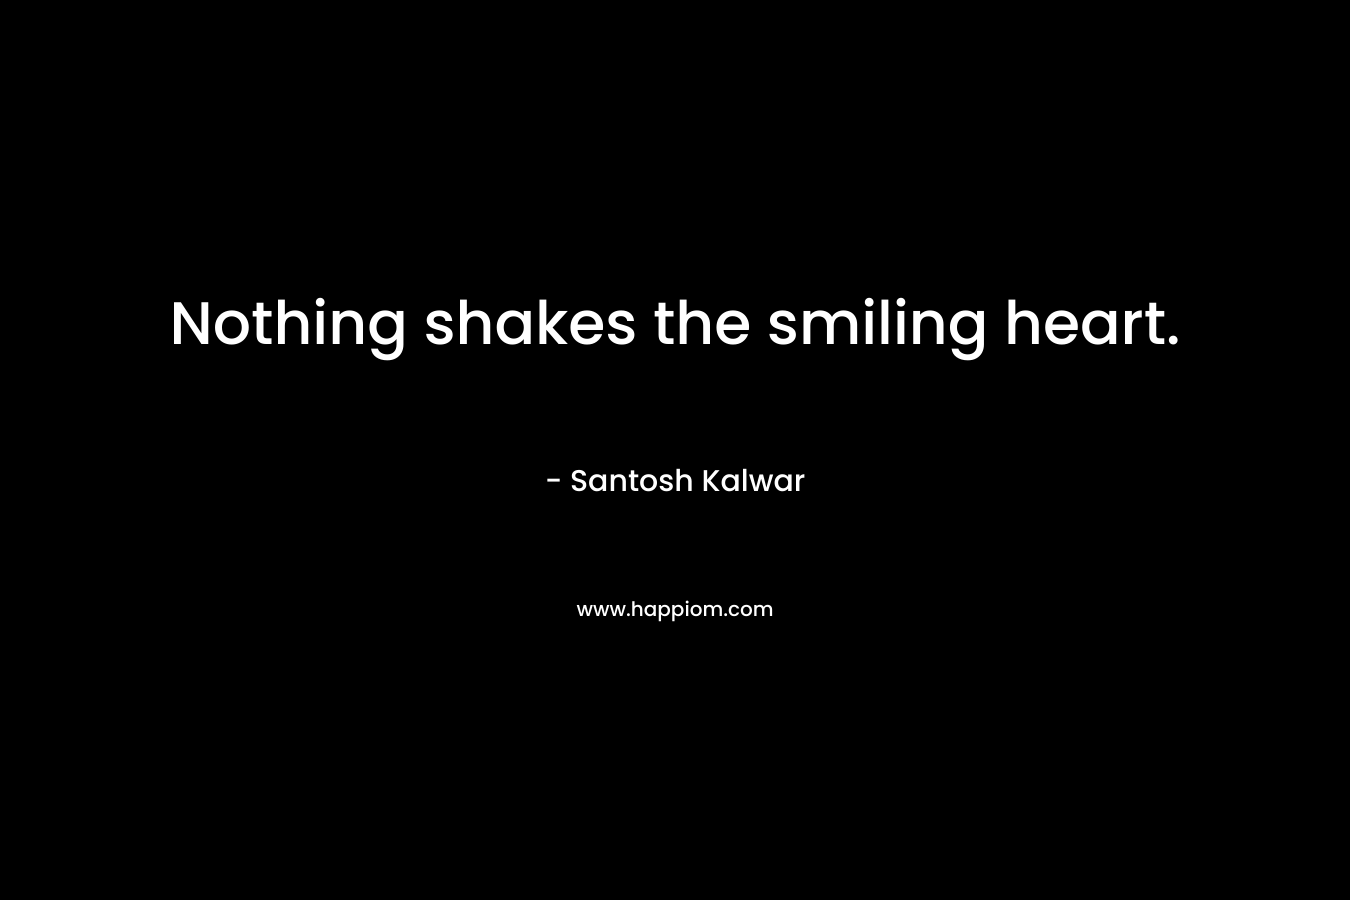 Nothing shakes the smiling heart.